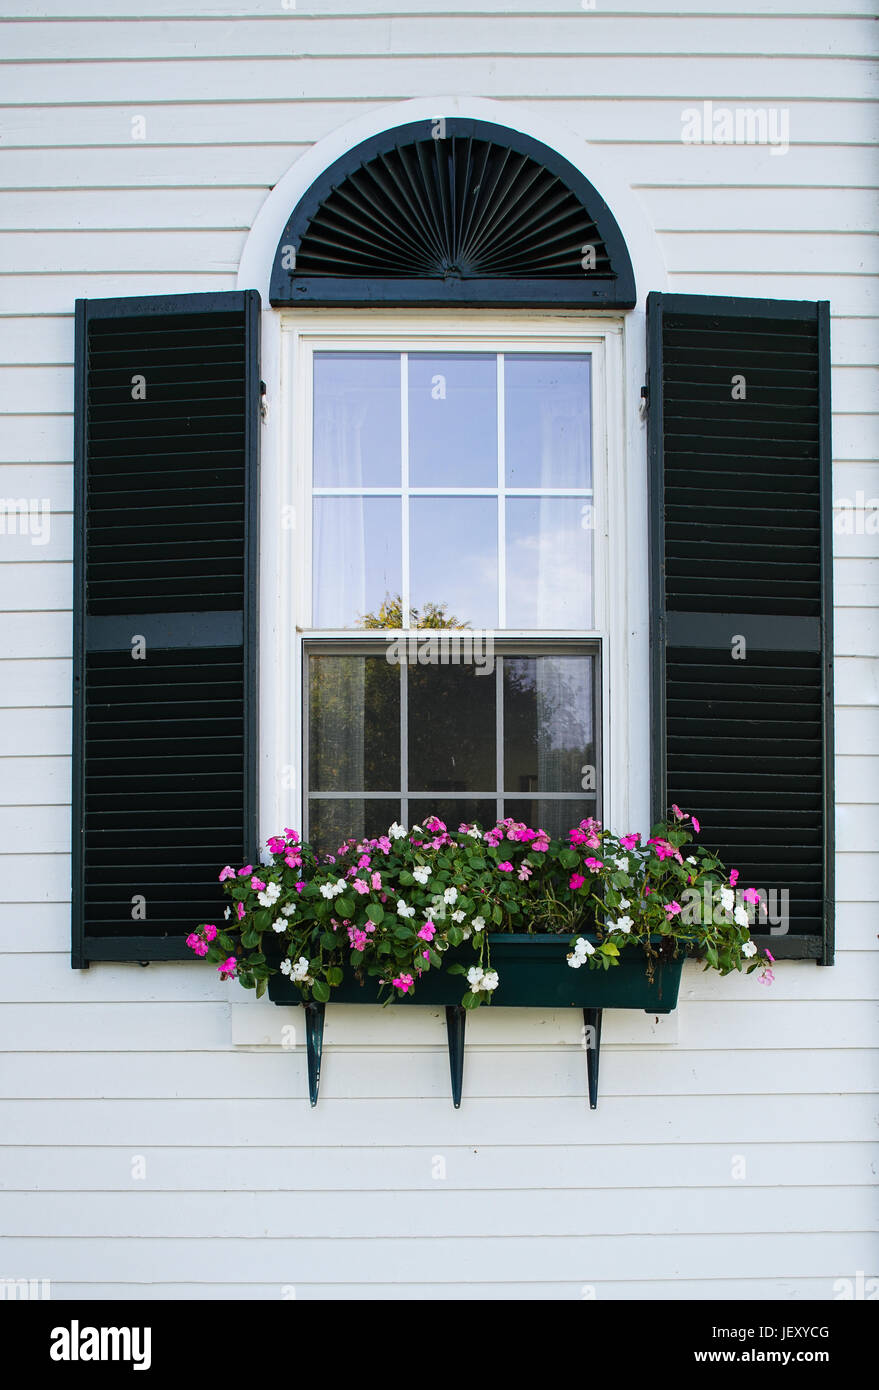 Black Window Box High Resolution Stock Photography And Images Alamy